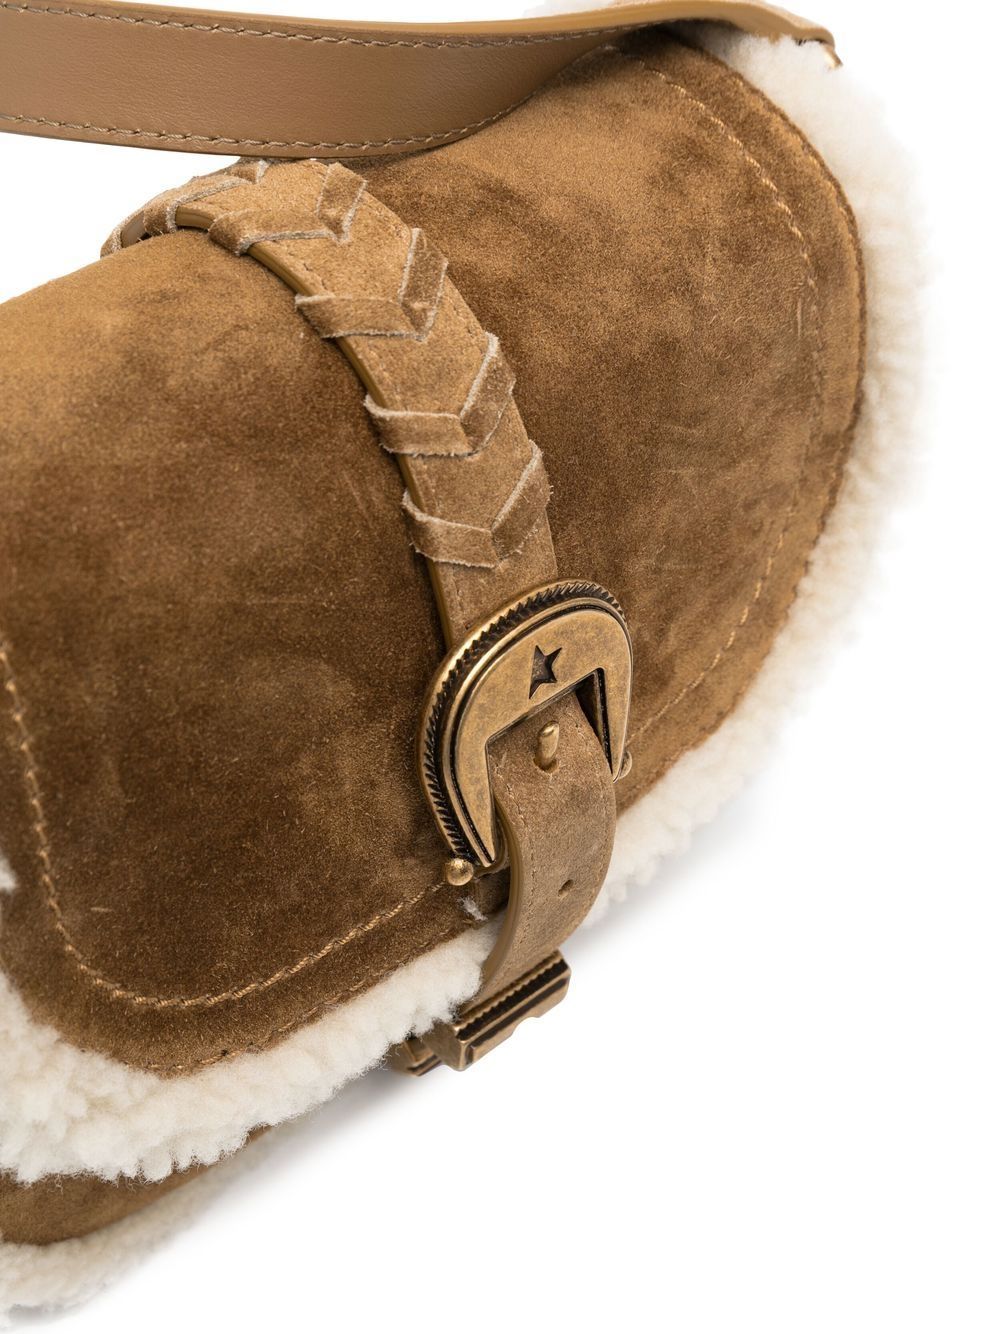 Women's Rodeo Bag in suede with shearling details